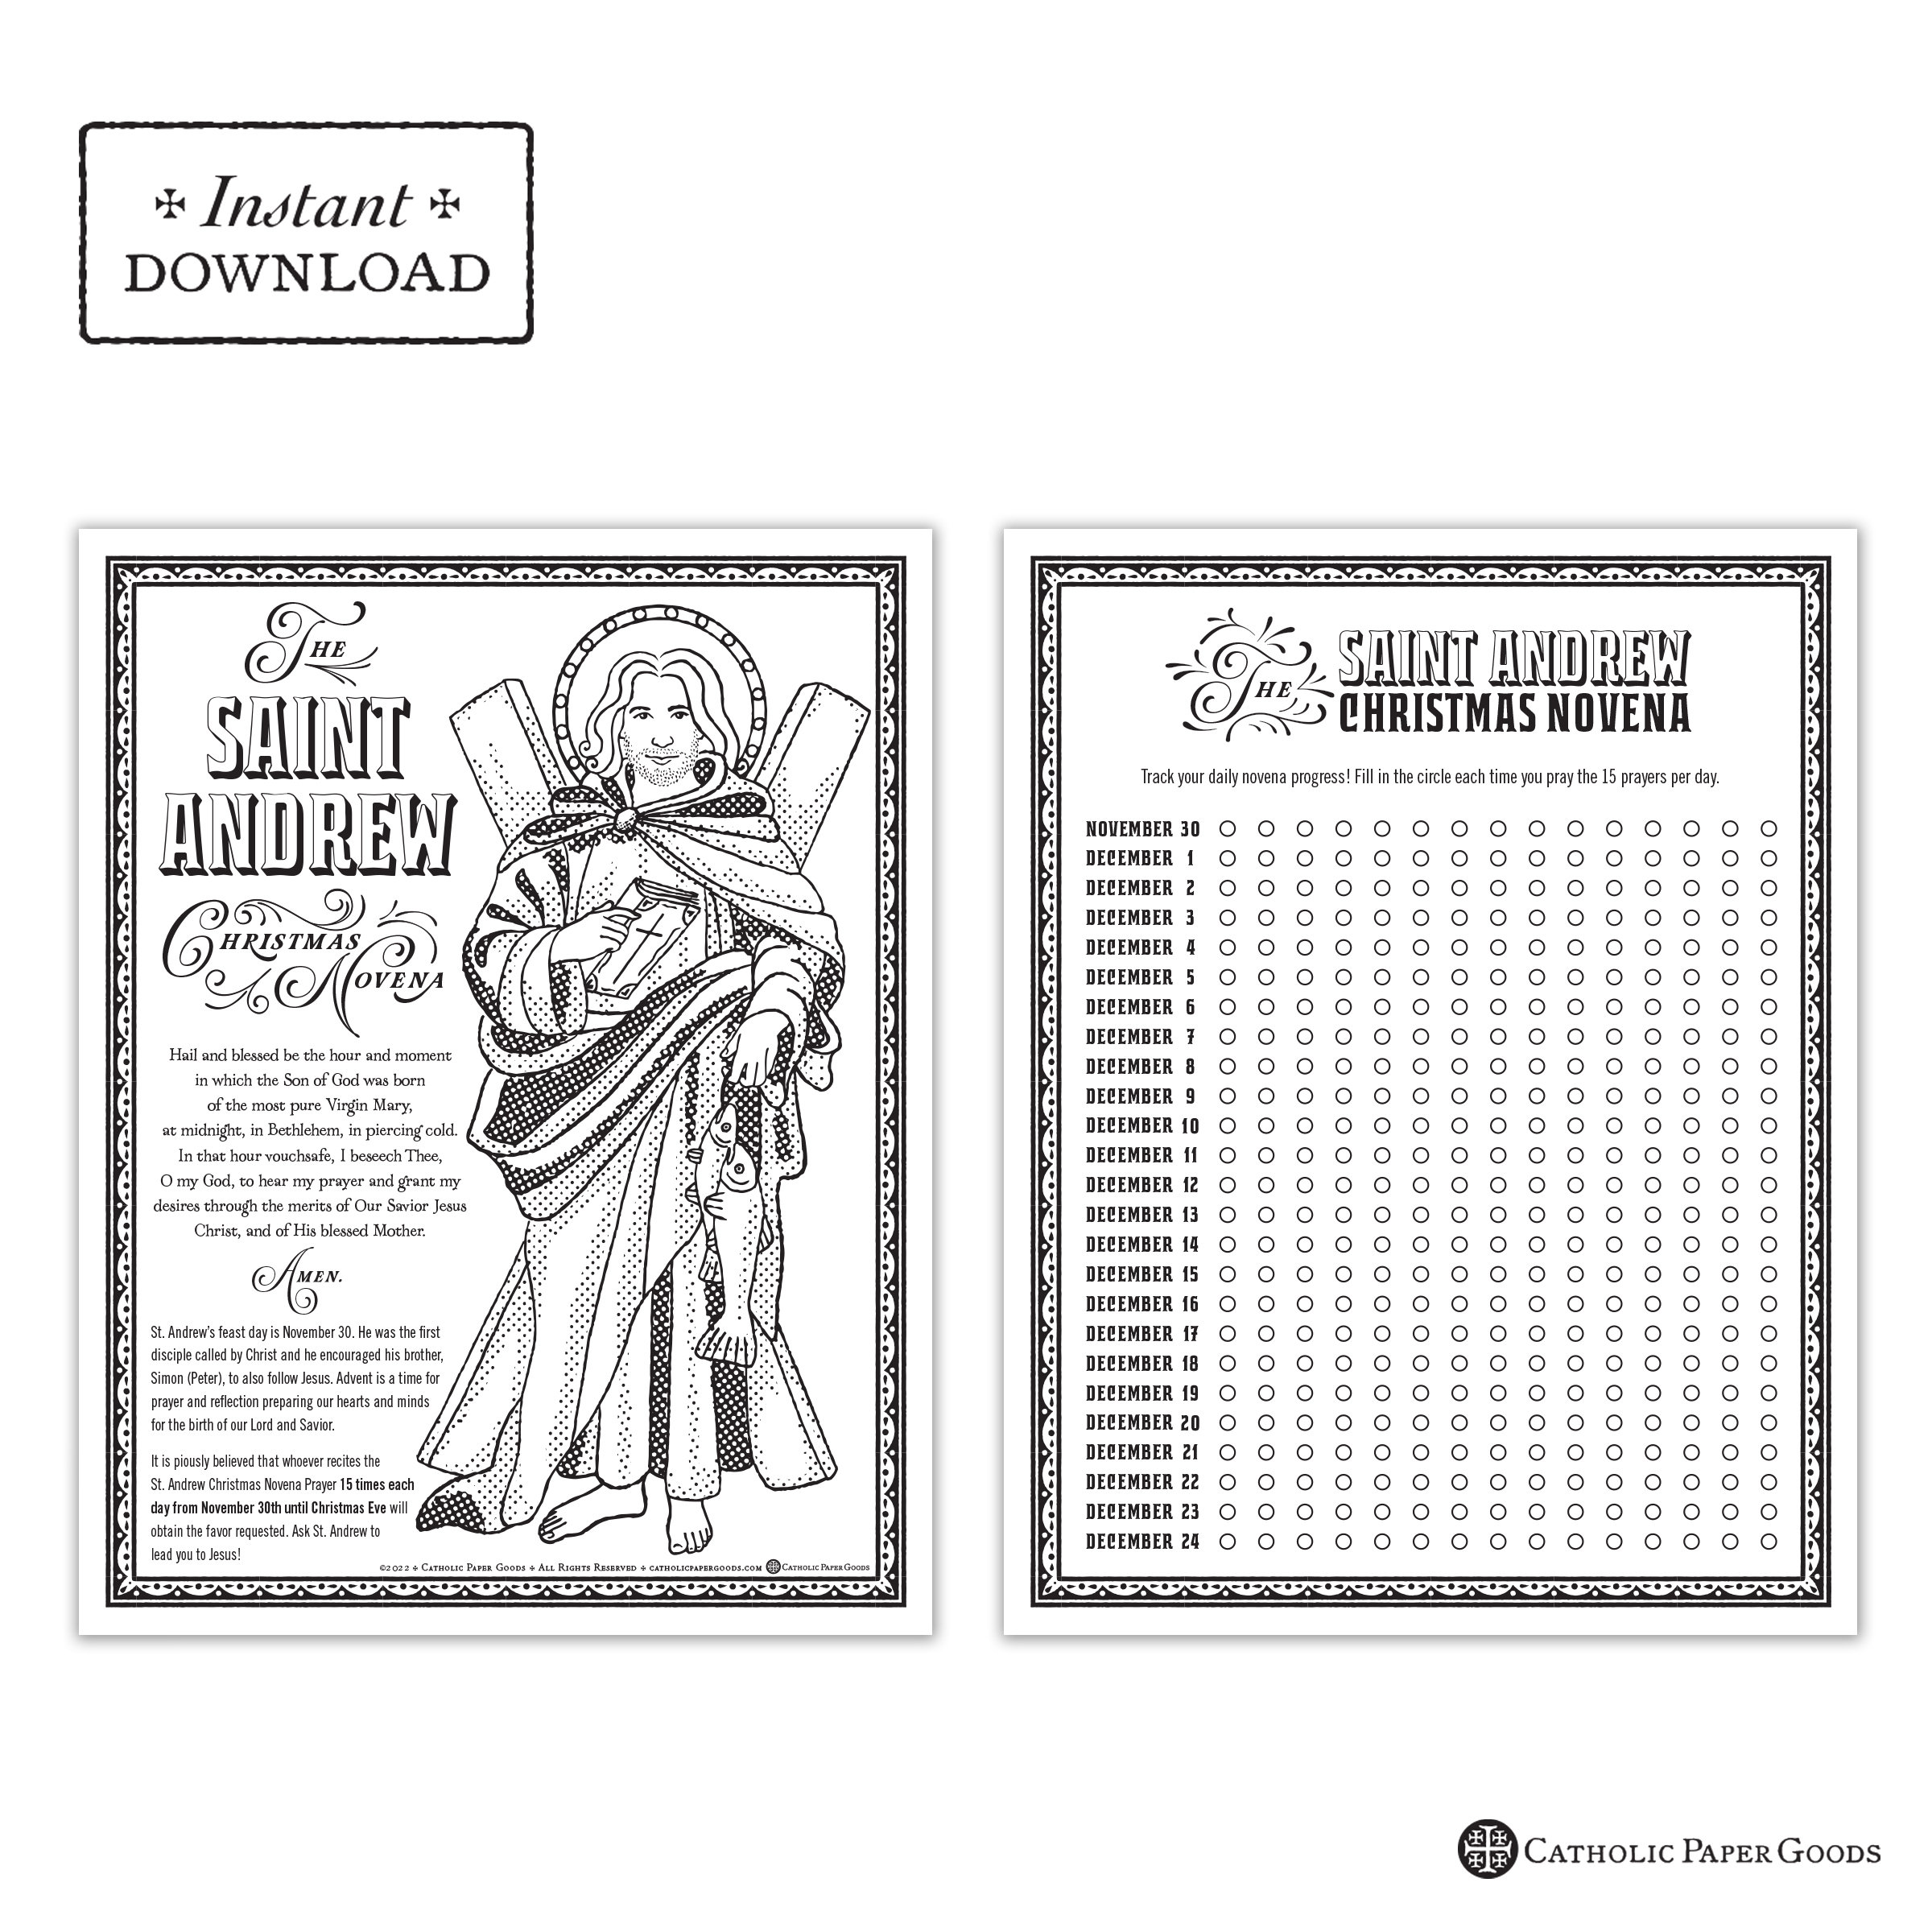 St andrew christmas novena catholic coloring page versions color black and white printable catholic advent activity digital pdf